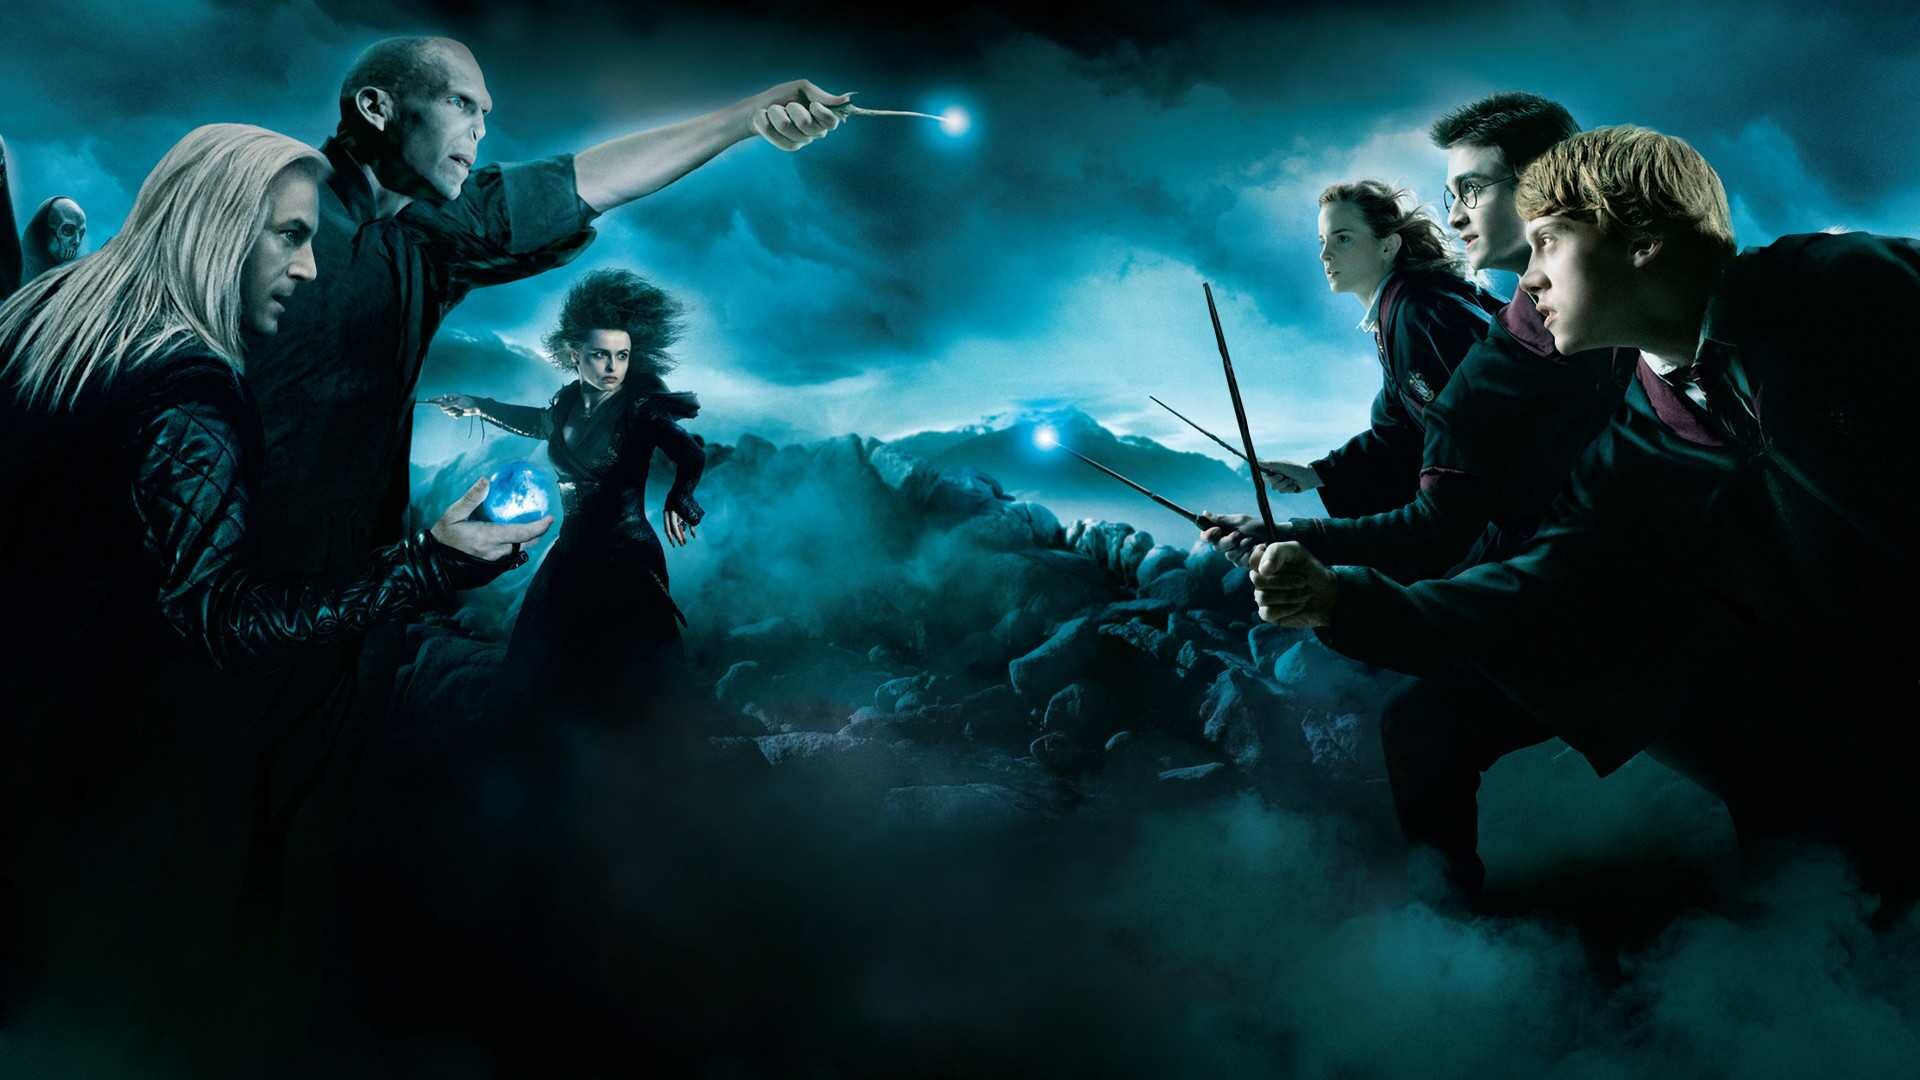 Harry Potter: A wizard, the only child of James and Lily Potter, Famous for having survived an attack by Lord Voldemort. 1920x1080 Full HD Background.